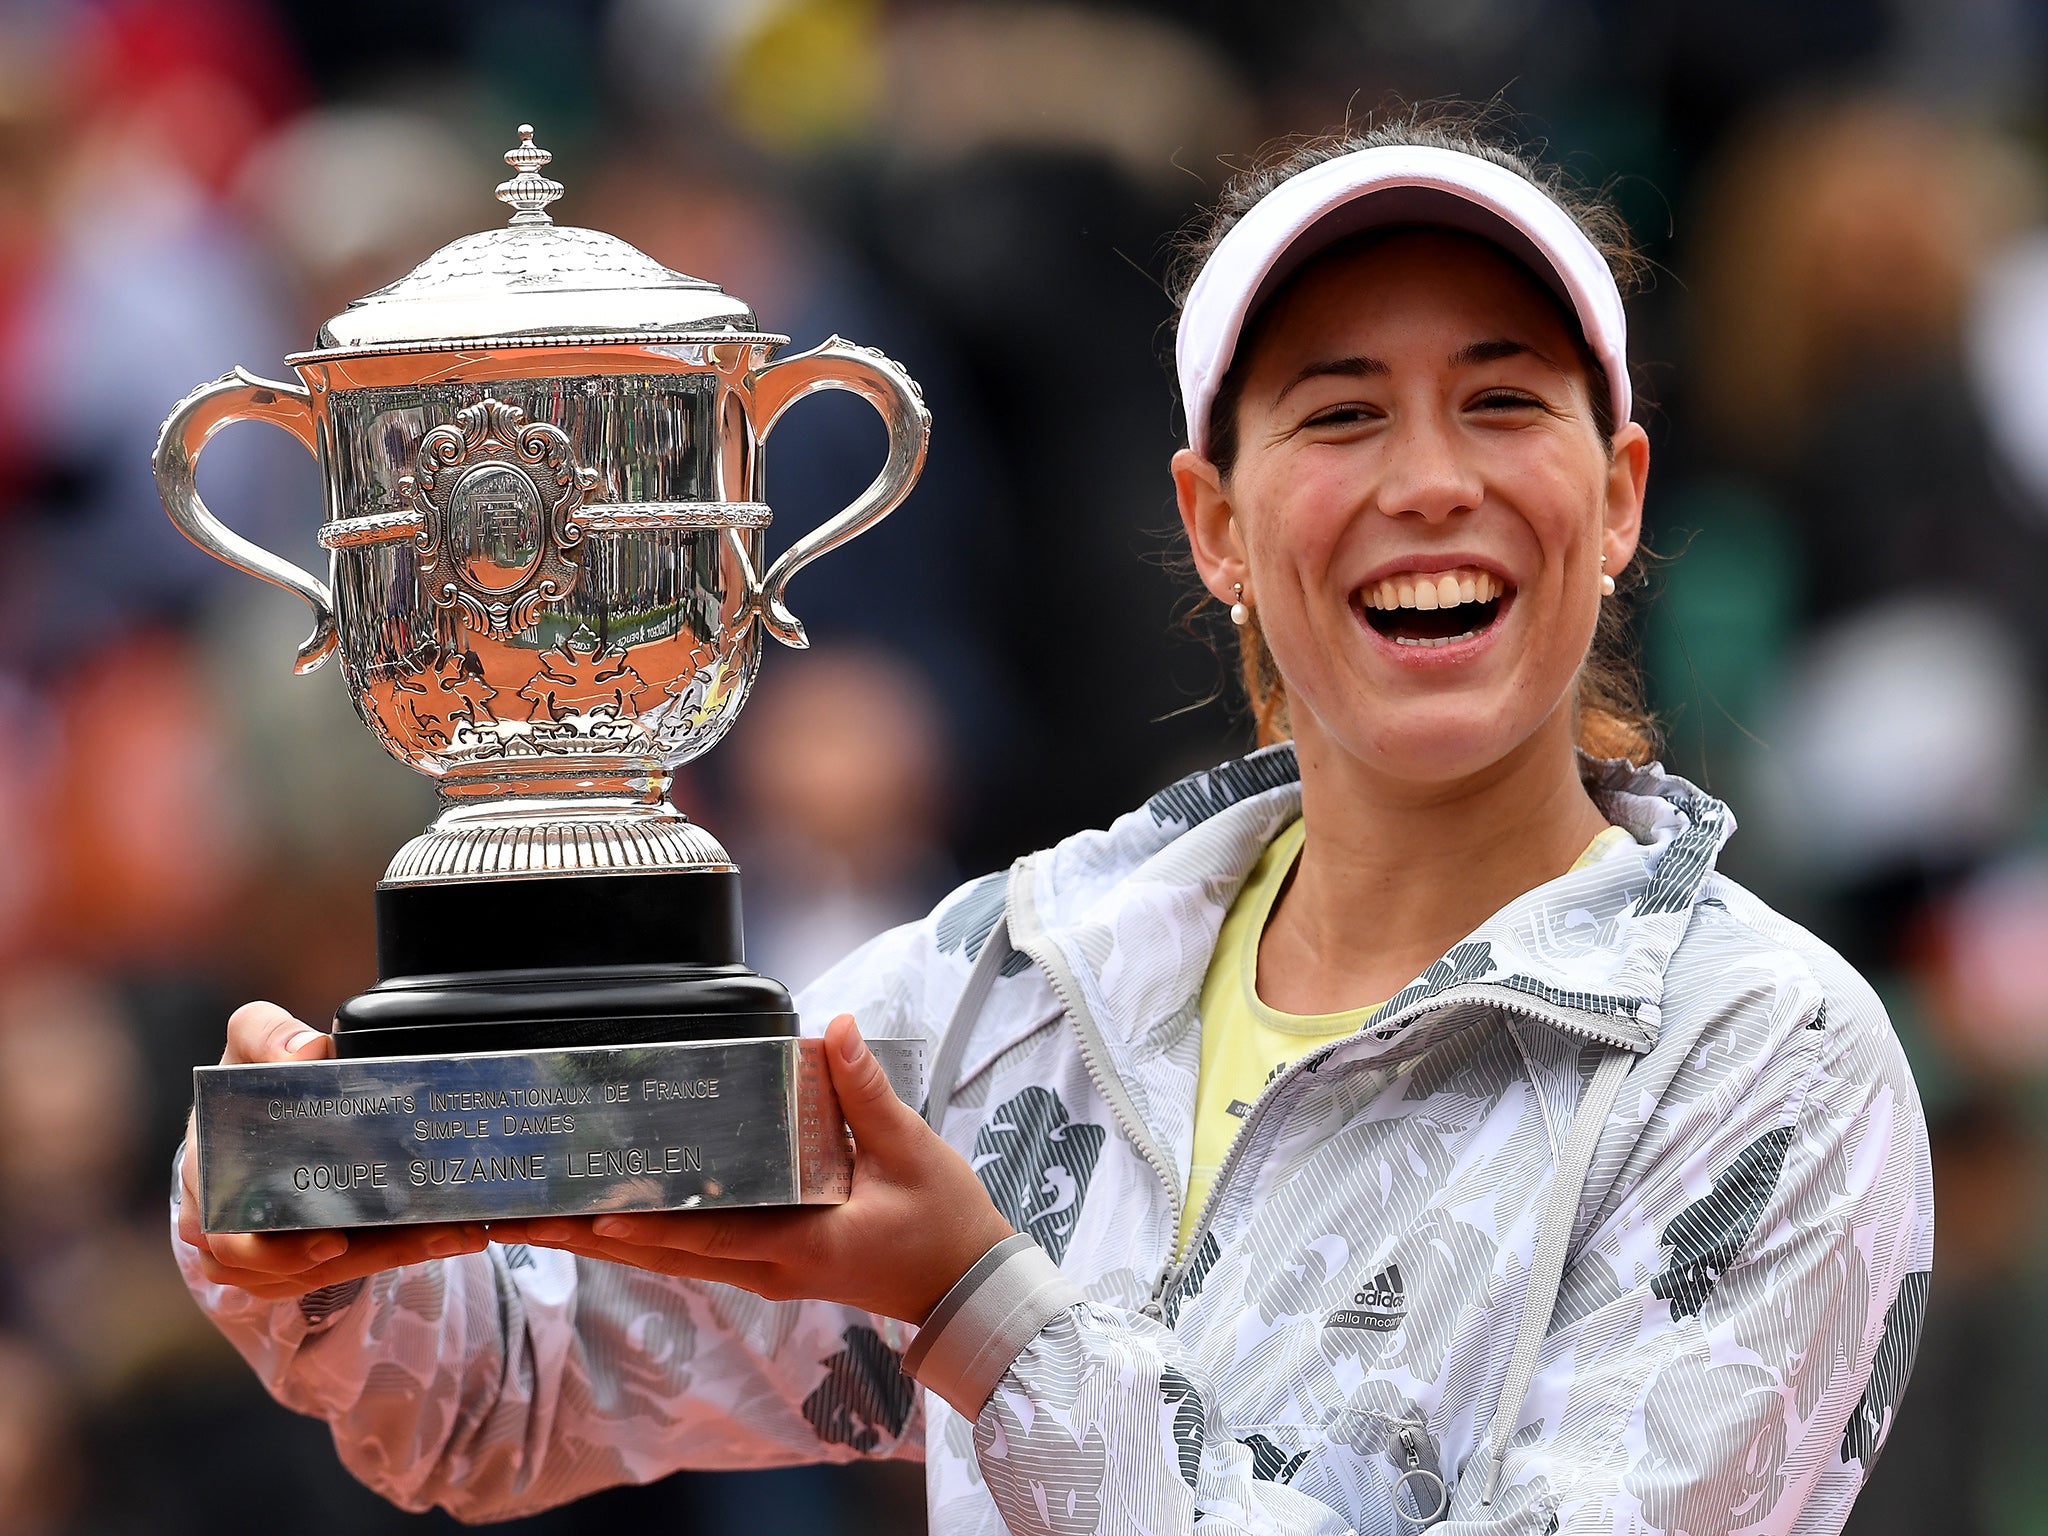 Muguruza put the disappointment of defeat in last year’s Wimbledon final behind her